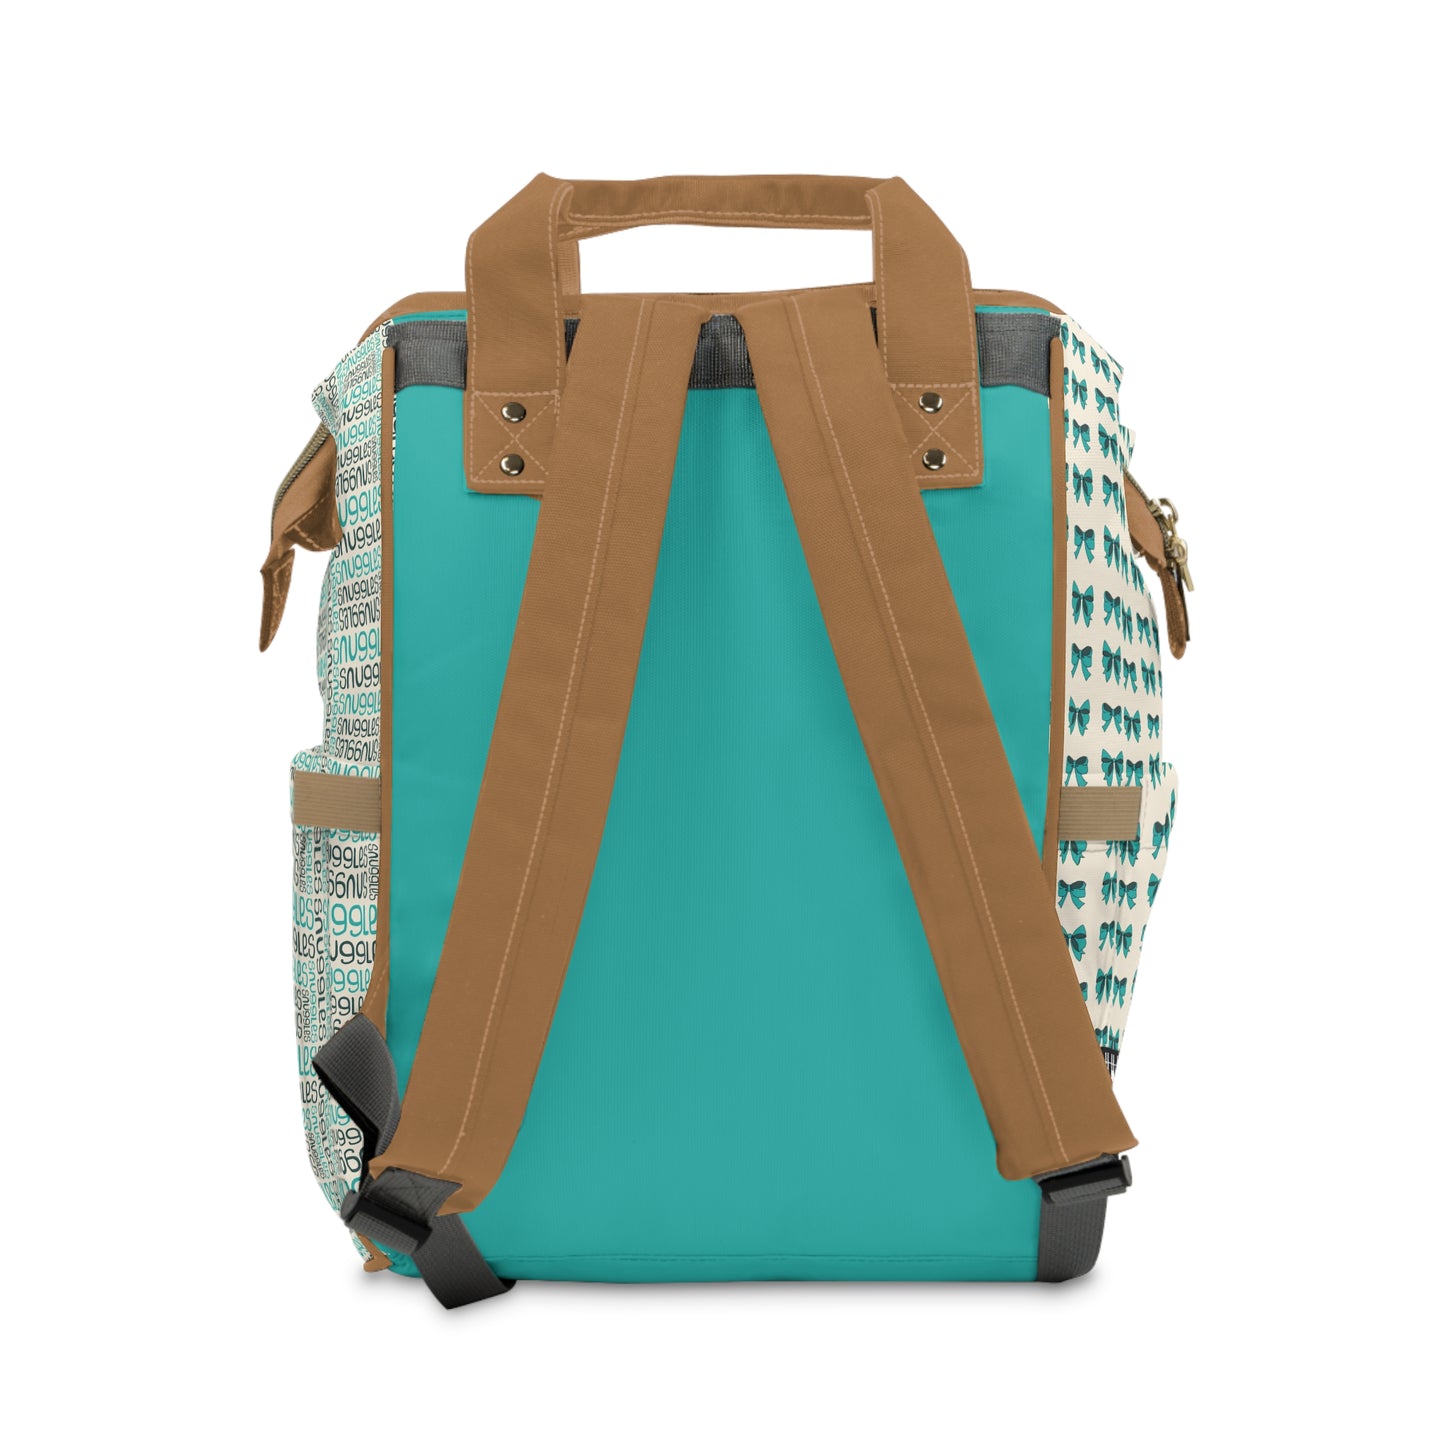 2041 CO DIAPER BACKPACK | BABY FACE